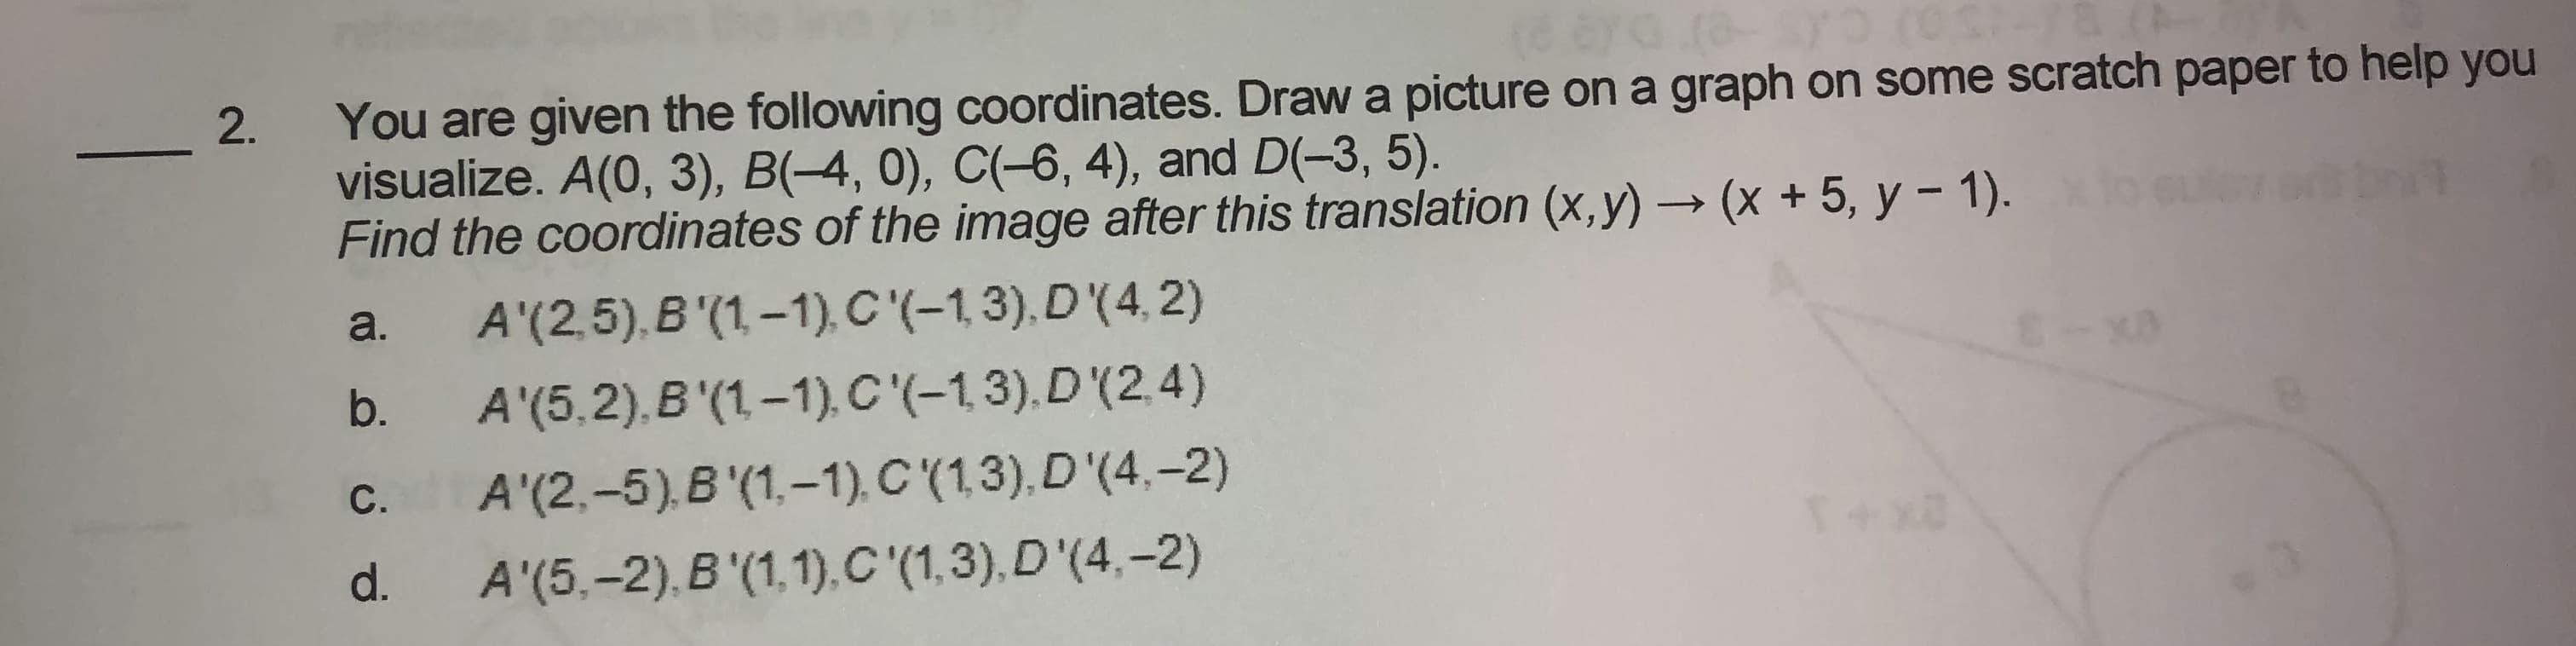 You are given the following coordinates. Draw a picture on a graph on some scratch paper to help you
visualize. A(0, 3), B(-4, 0), C(-6, 4), and D(-3, 5).
Find the coordinates of the image after this translation (x, y) → (x + 5, y – 1).
A'(2,5), B'(1, -1), C'(-1,3), D(4, 2)
A'(5,2), B'(1-1). C'(-1,3).D'(2.4)
a.
b.
С.
A'(2,-5).B (1,-1), C (1,3),D'(4.-2)
d.
A'(5.-2),B '(1,1),C'(1,3),D'(4,–2)
